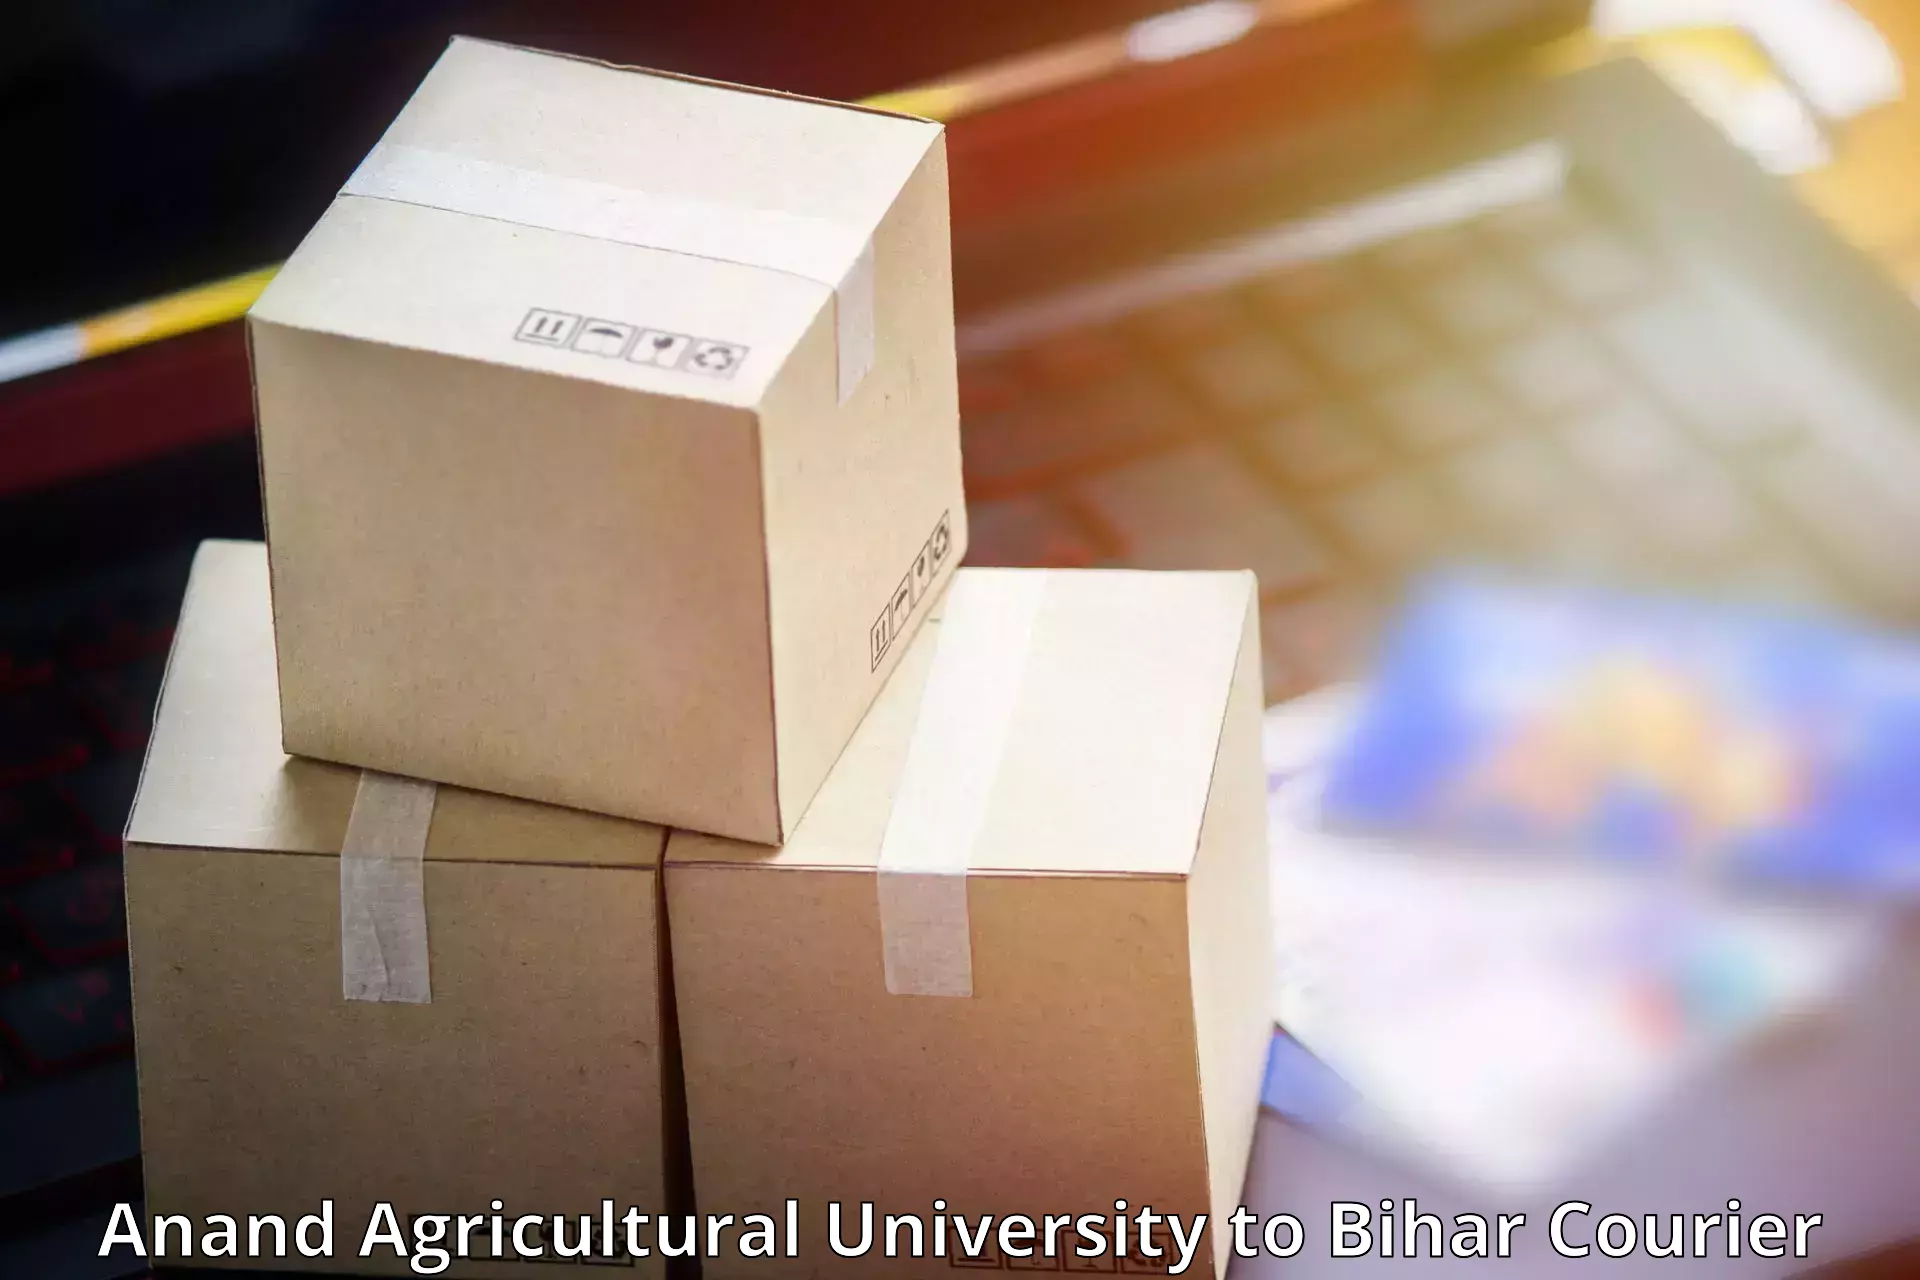 Express package delivery Anand Agricultural University to Munger